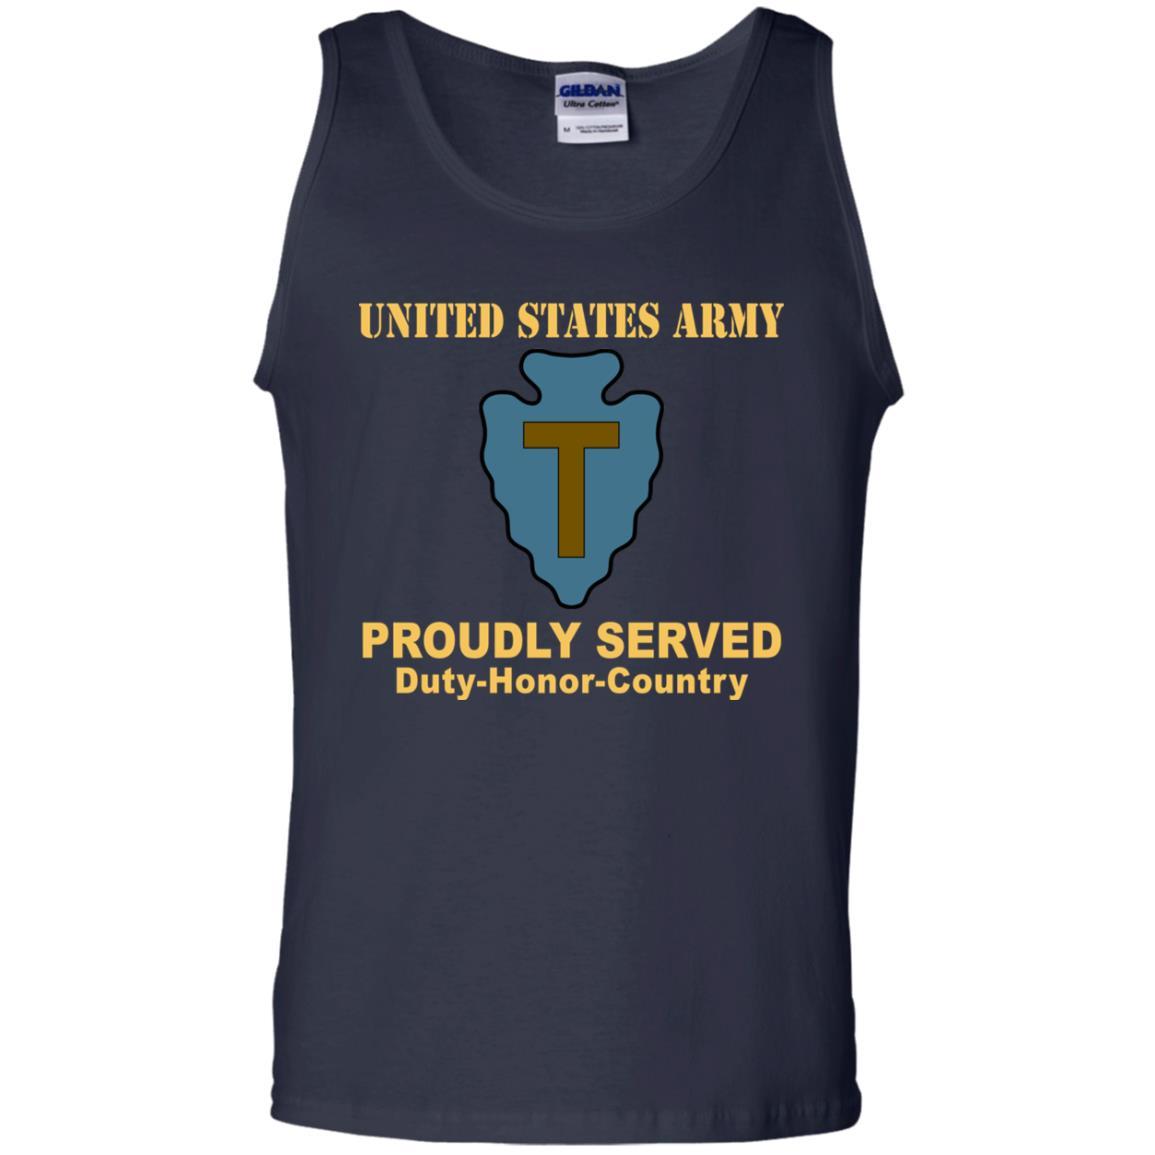 US ARMY 36TH INFANTRY DIVISION - Proudly Served T-Shirt On Front For Men-TShirt-Army-Veterans Nation